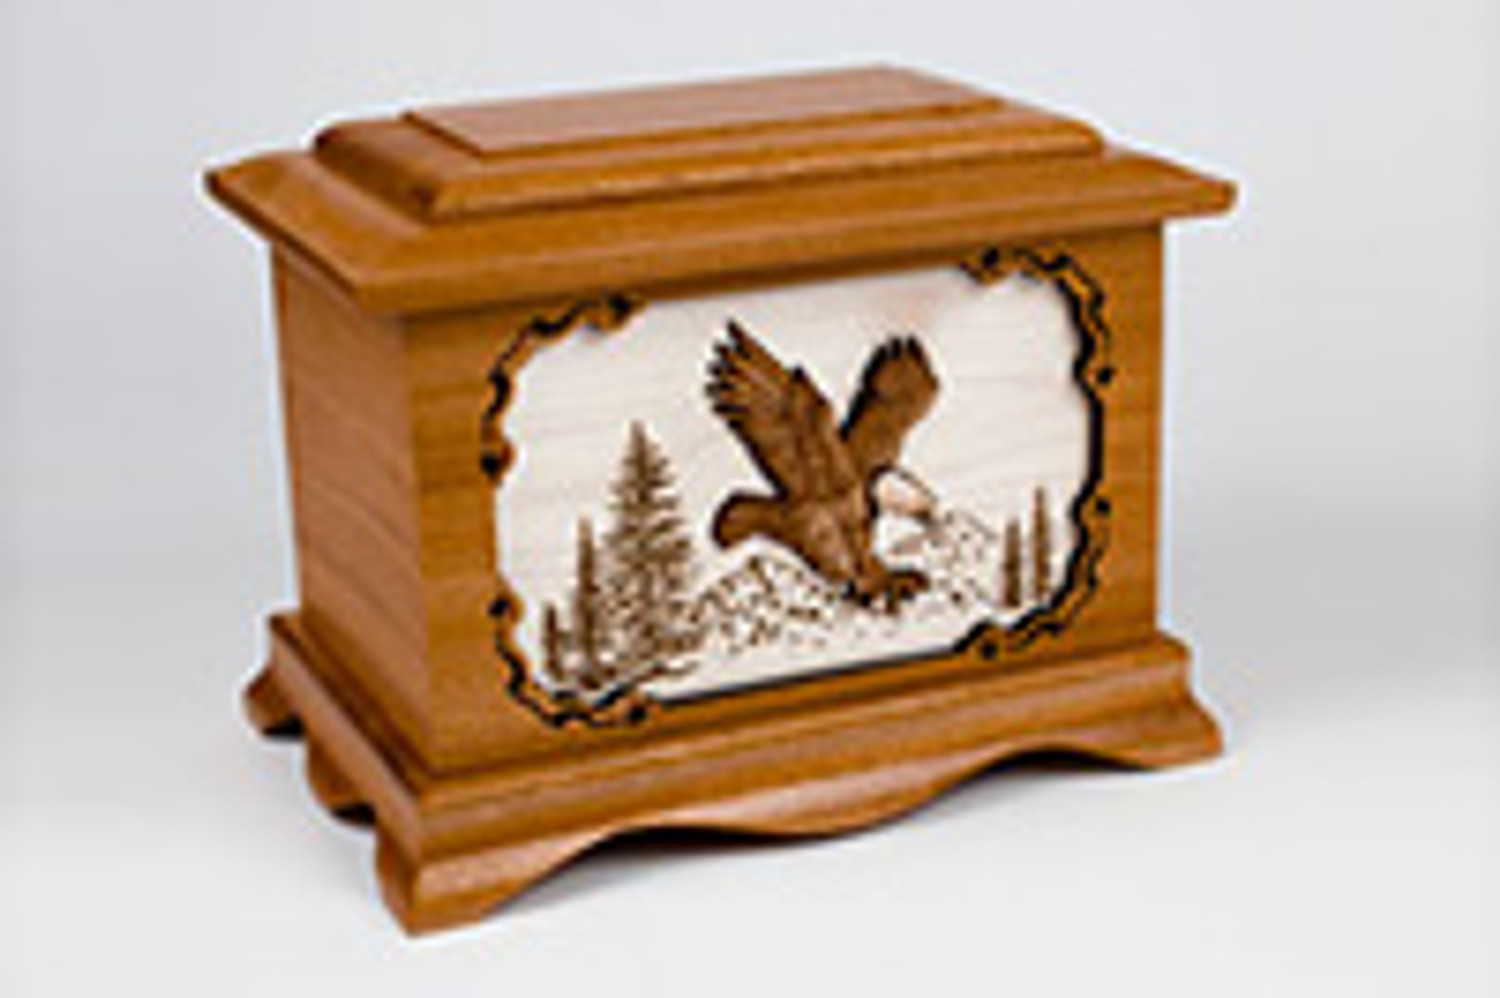 3-Dimensional Inlay Art Wood Cremation Urns Photo Gallery